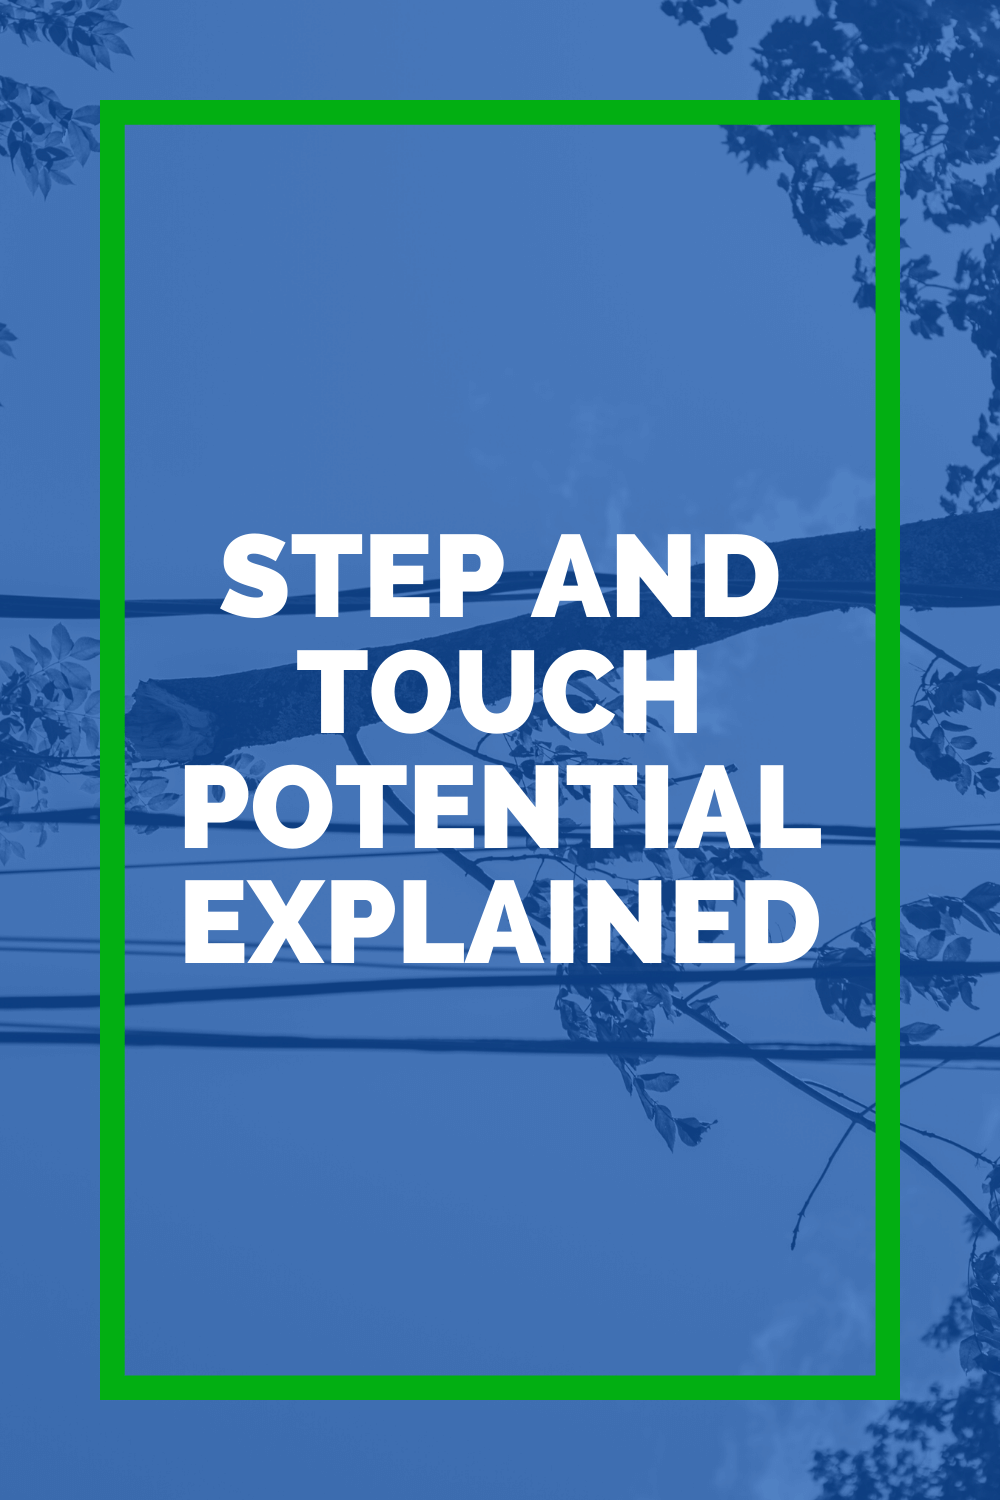 What Is Step and Touch Potential?